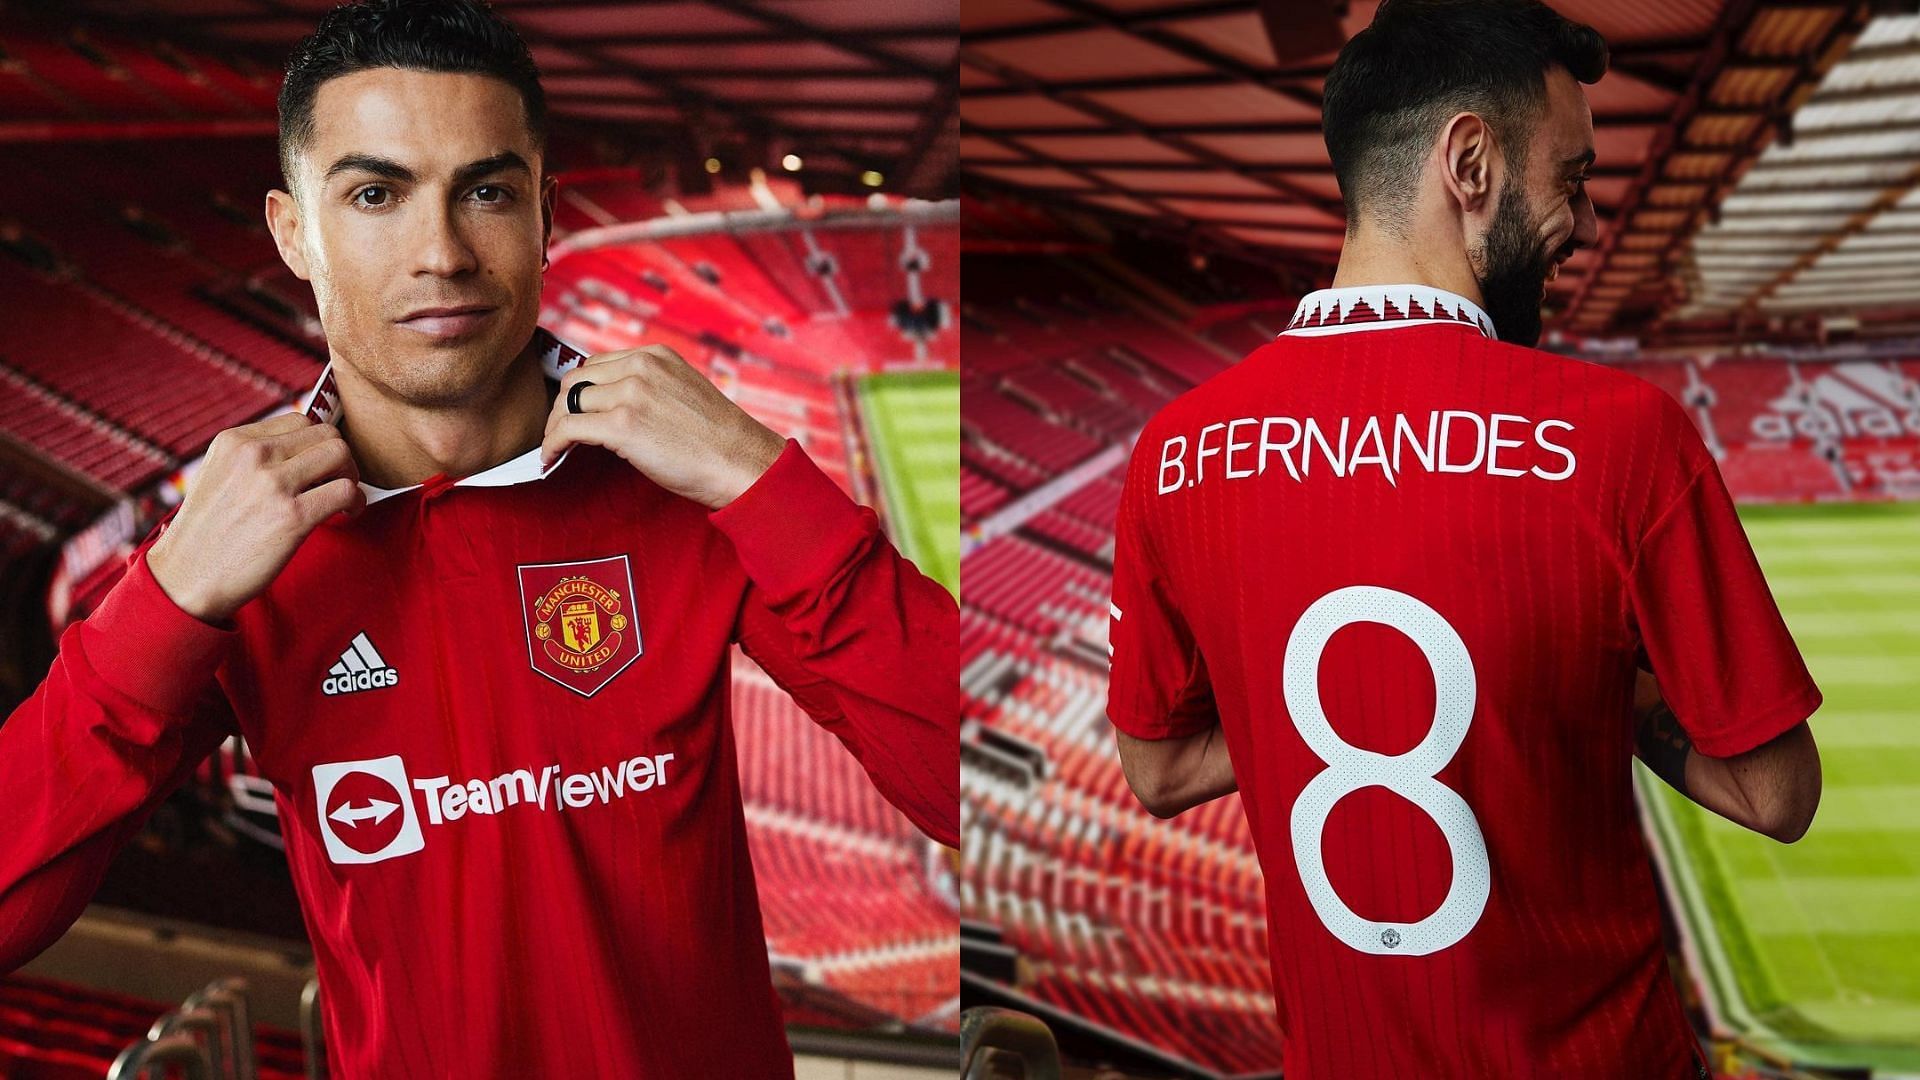 Where To Buy Manchester United X Adidas 2022 23 Home Kit? Price, Release Date, And More Explored